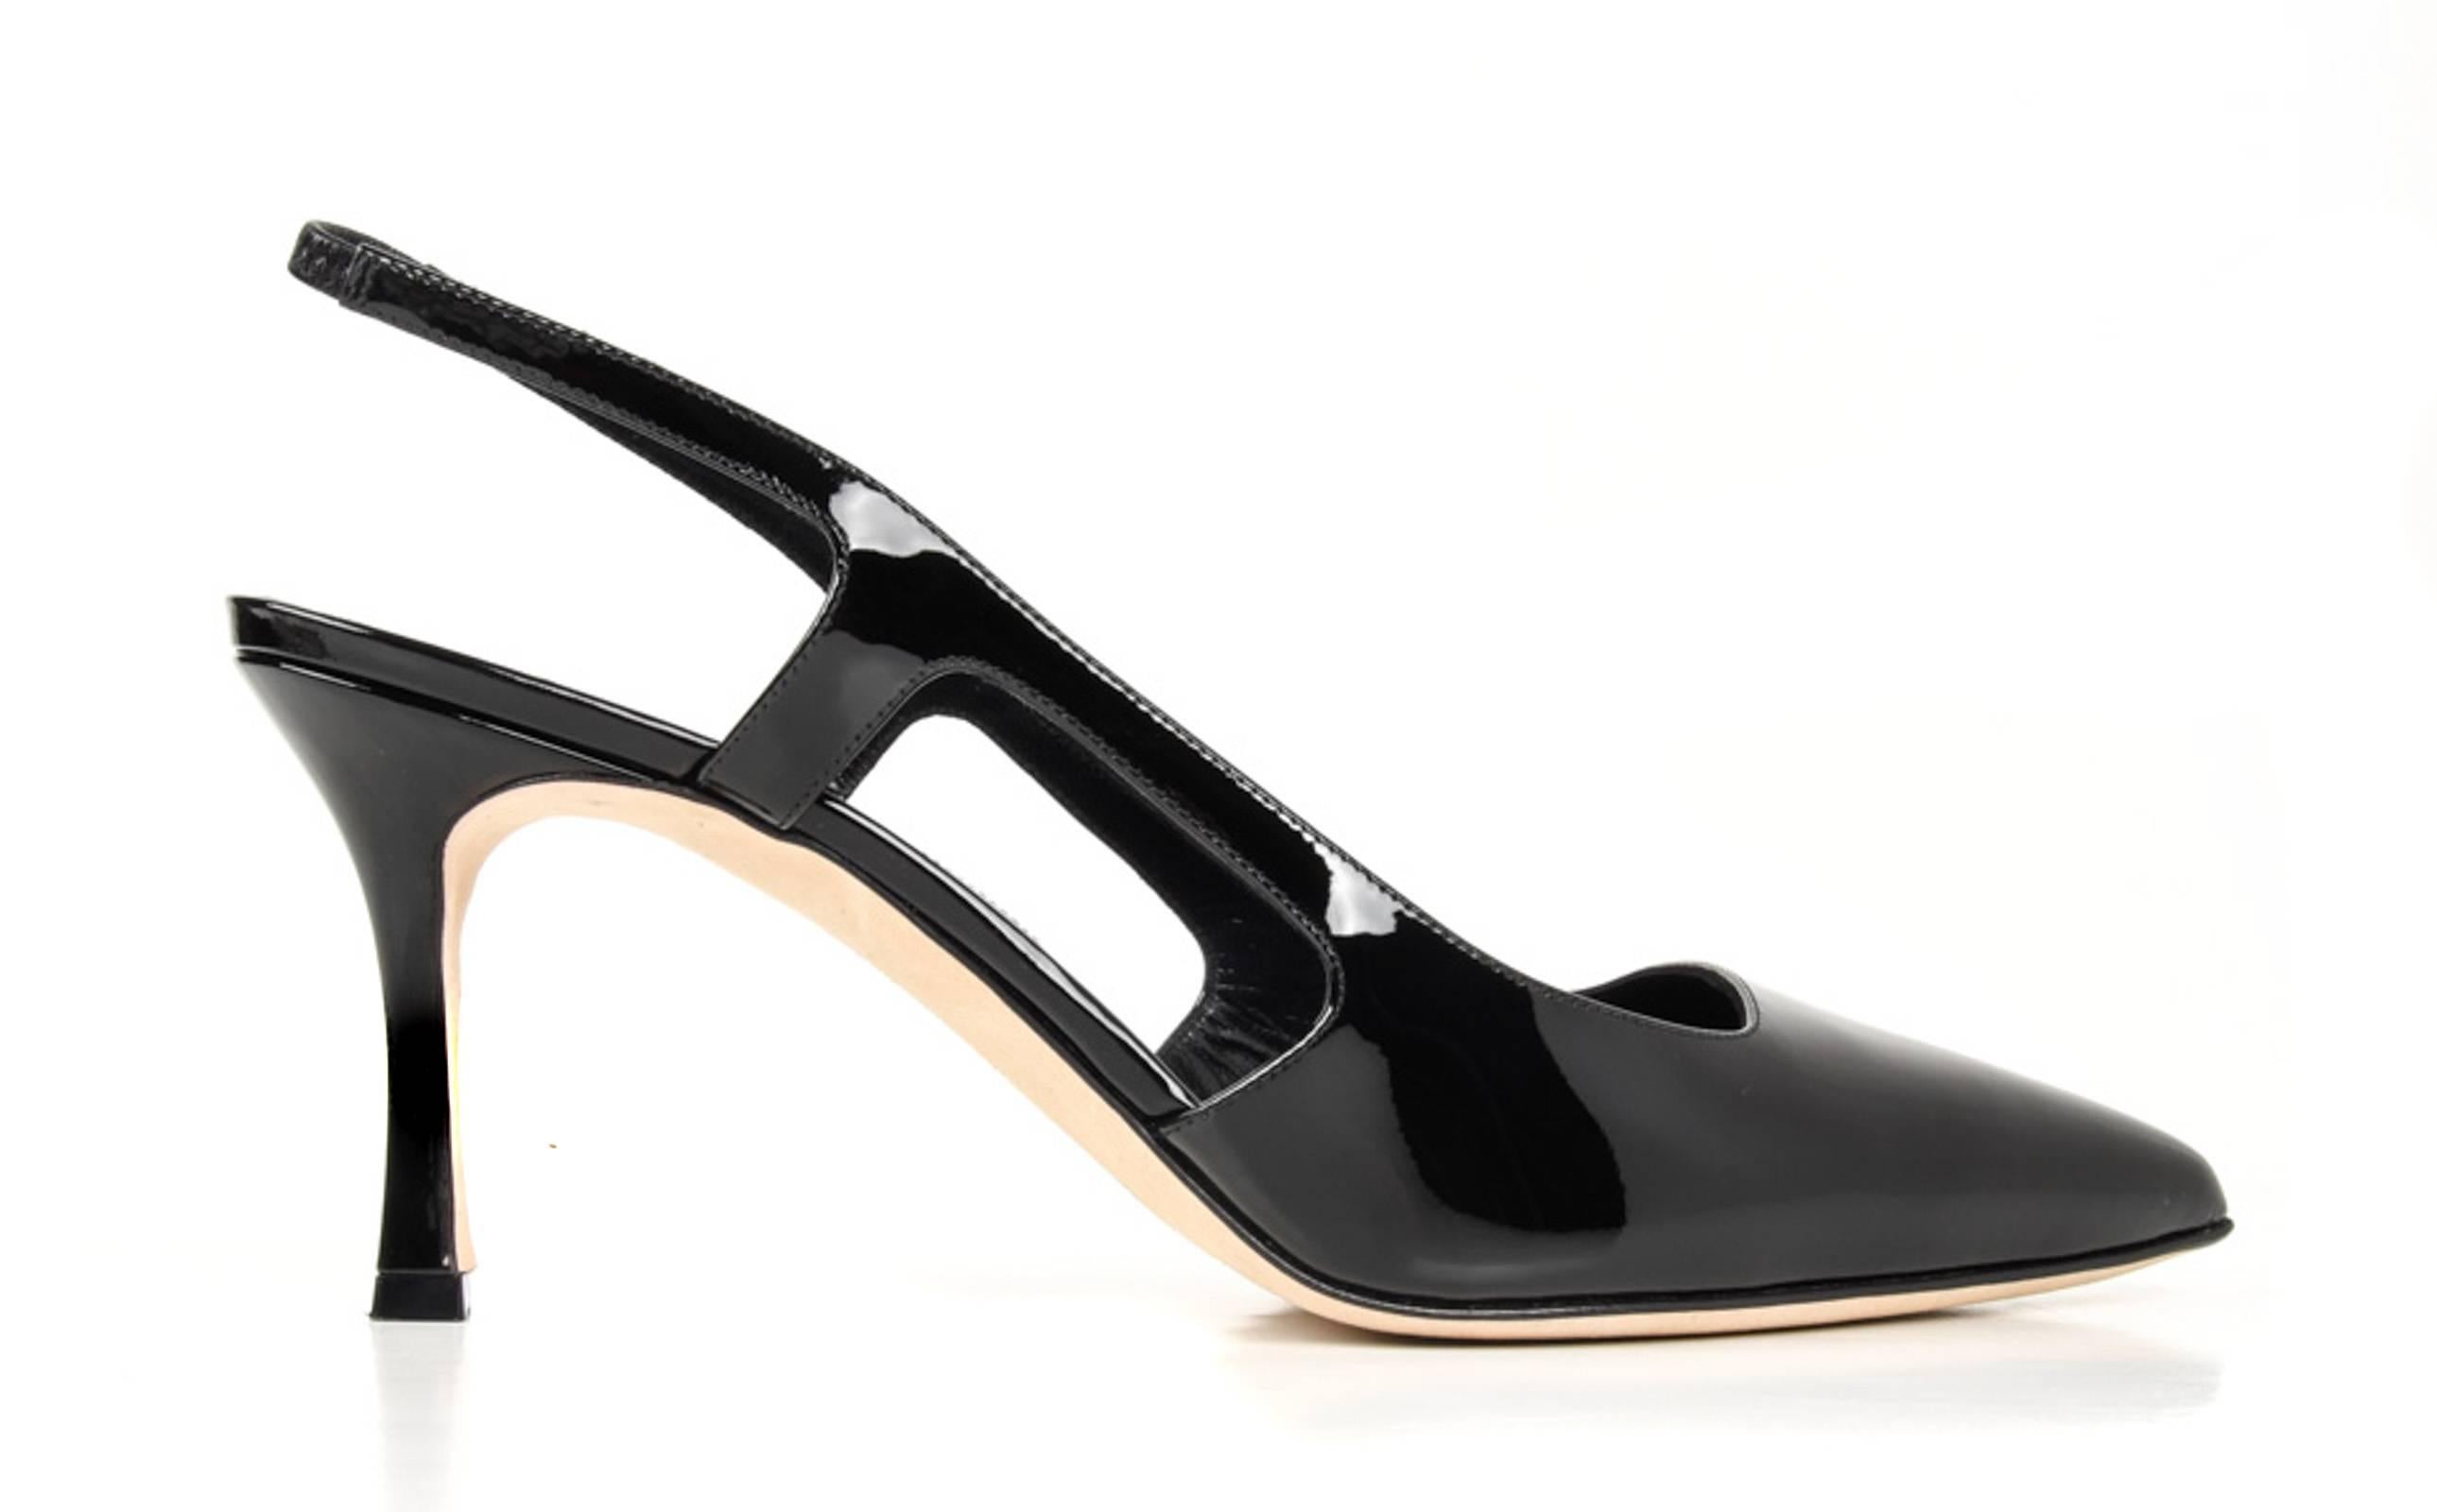 Guaranteed authentic Manolo Blahnik black patent leather slingback shoe.
Sleek and classic slingback with 3